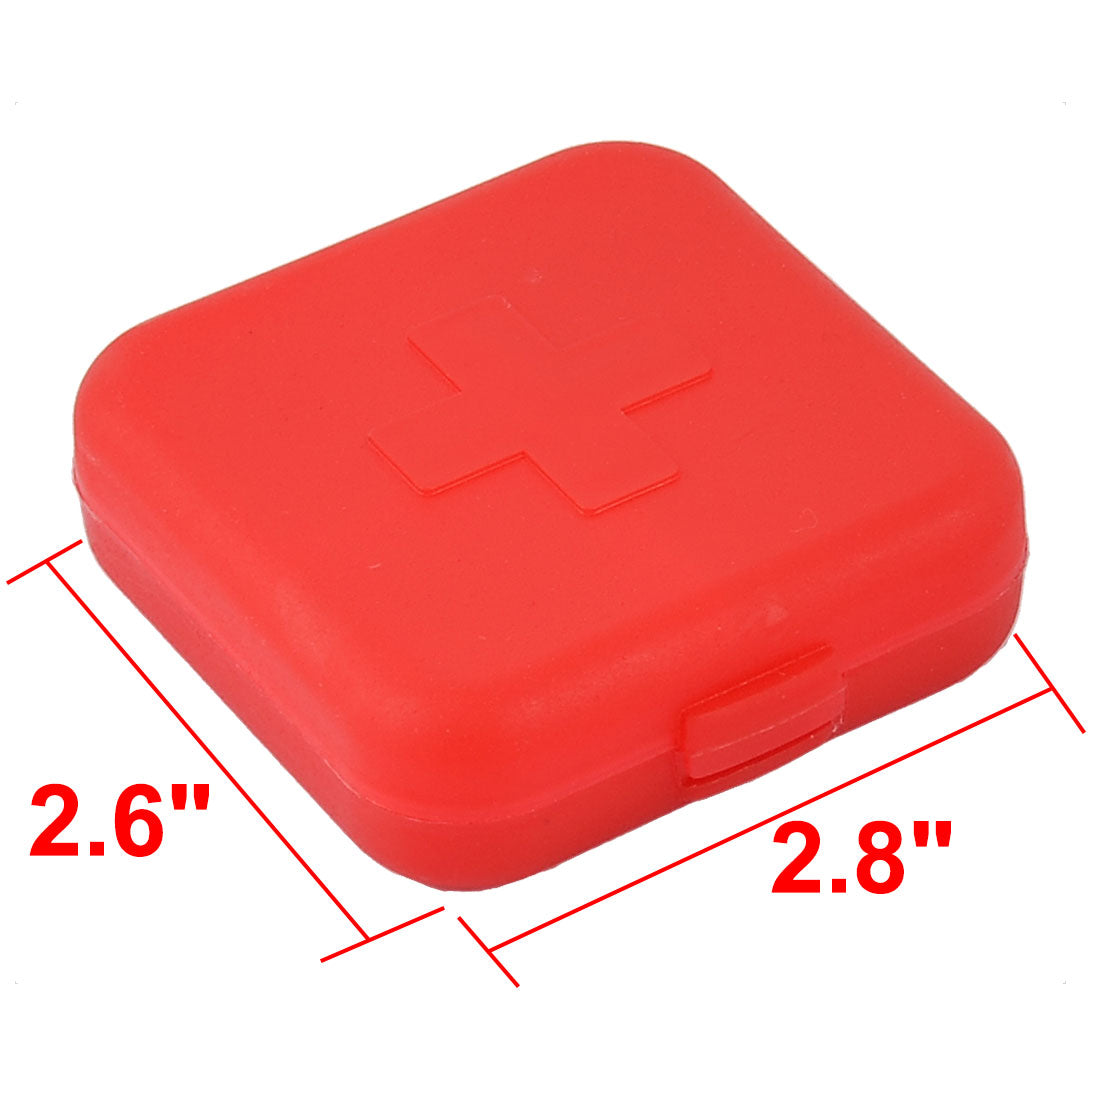 uxcell Uxcell Travel Portable Pill 4 Compartments Storage Case Box Holder Red